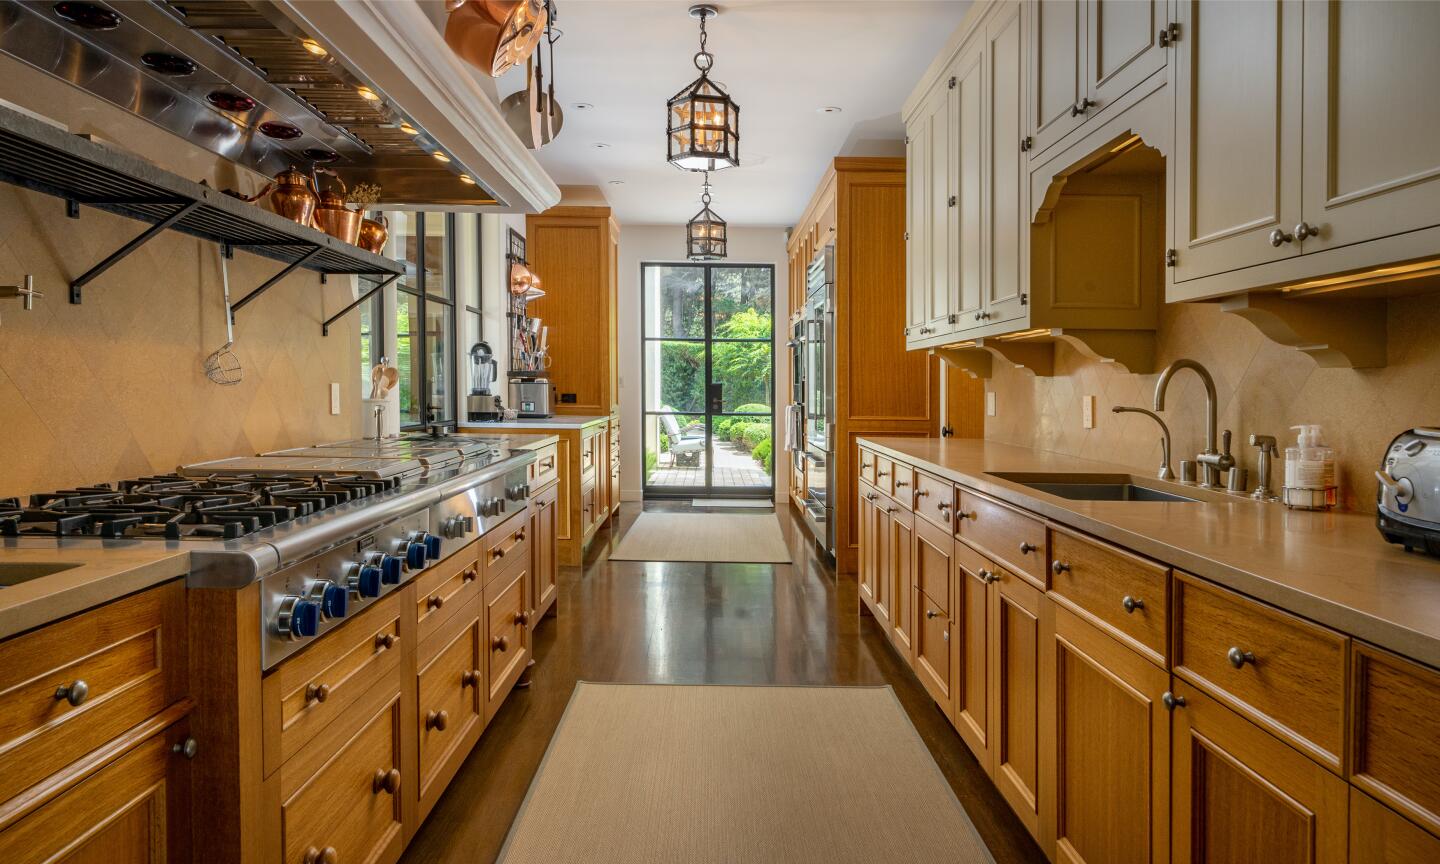 The galley-style kitchen.